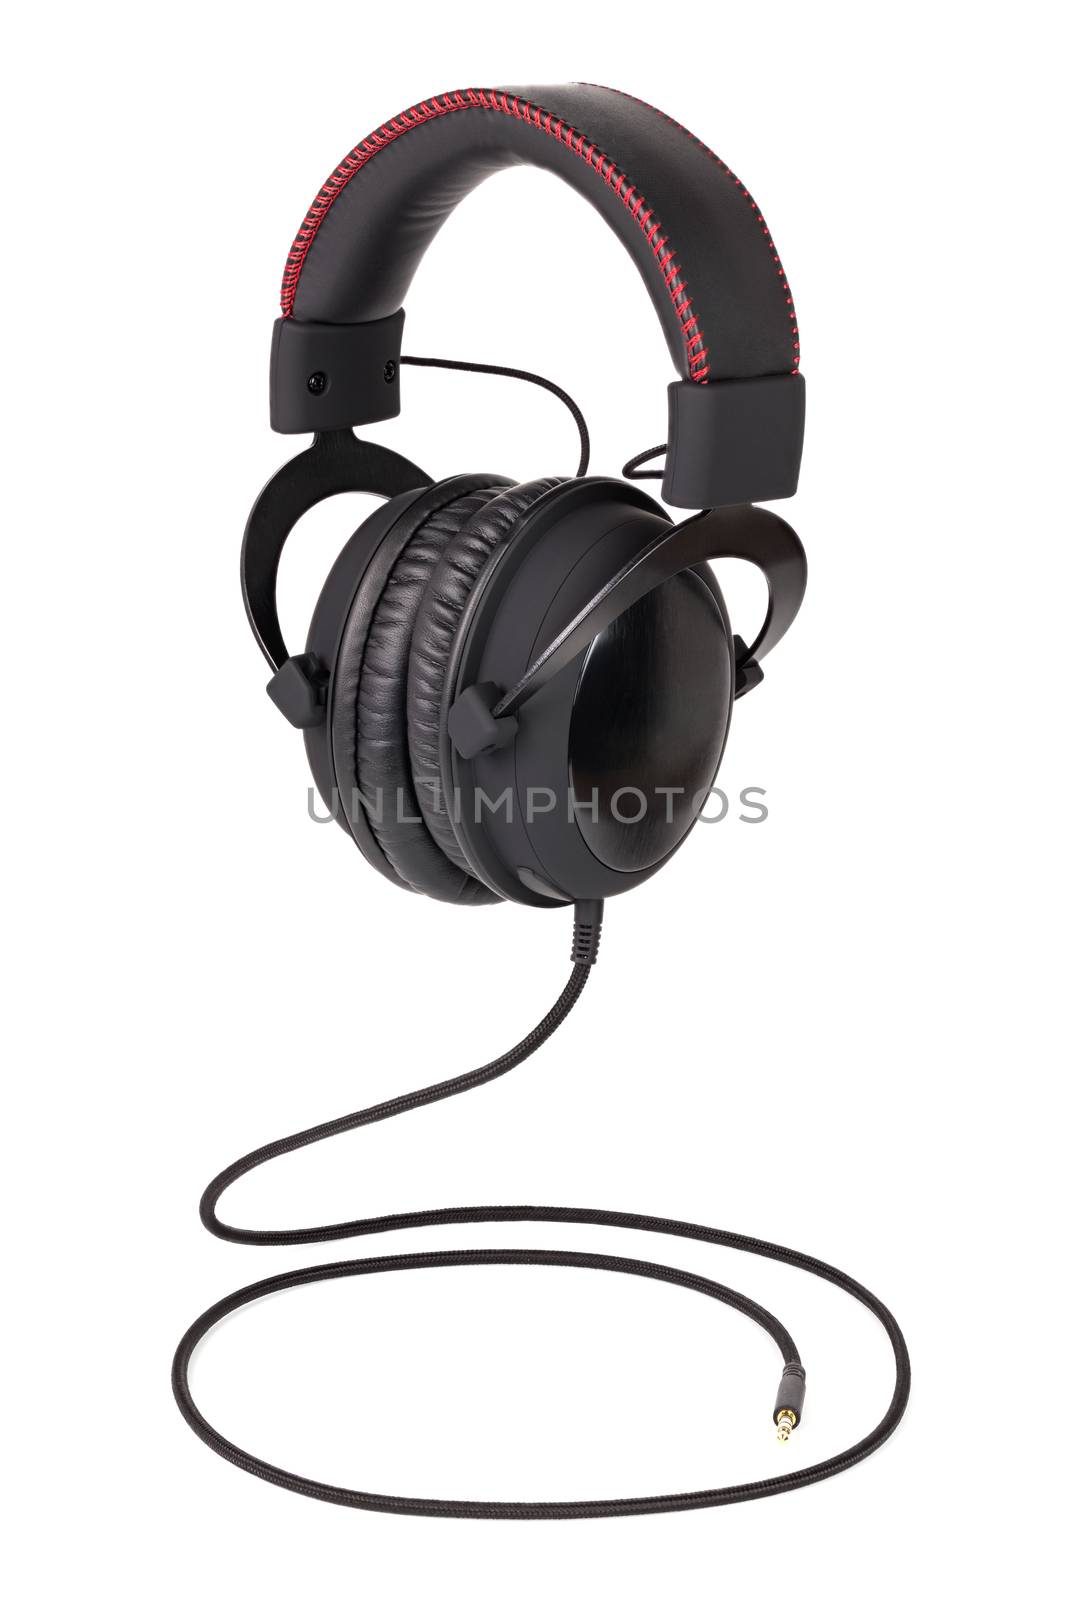 wired black professional headphones isolated on white background flying over wire like a snake